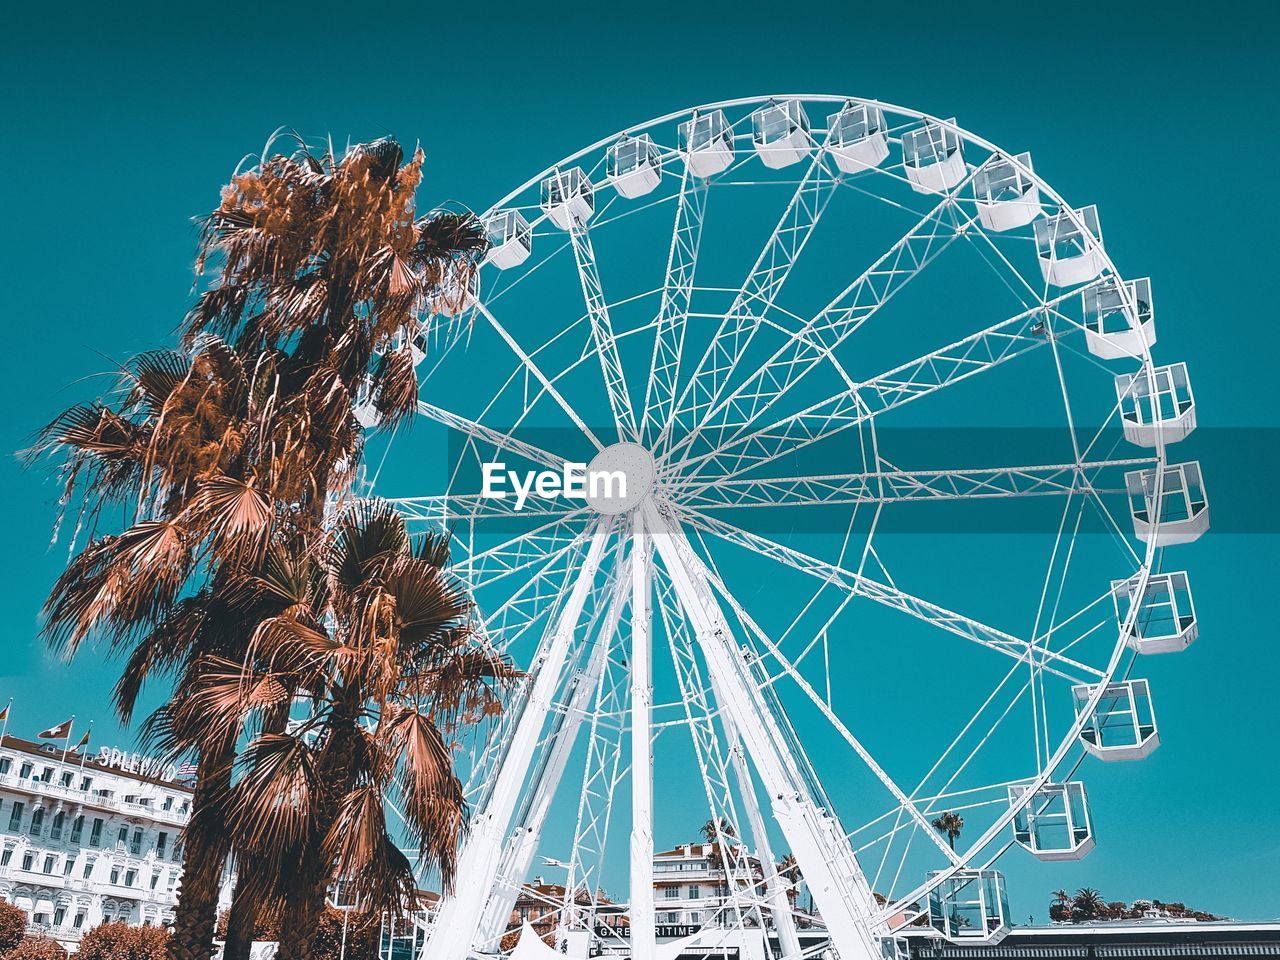 Panoramic ferris wheel in cannes, france